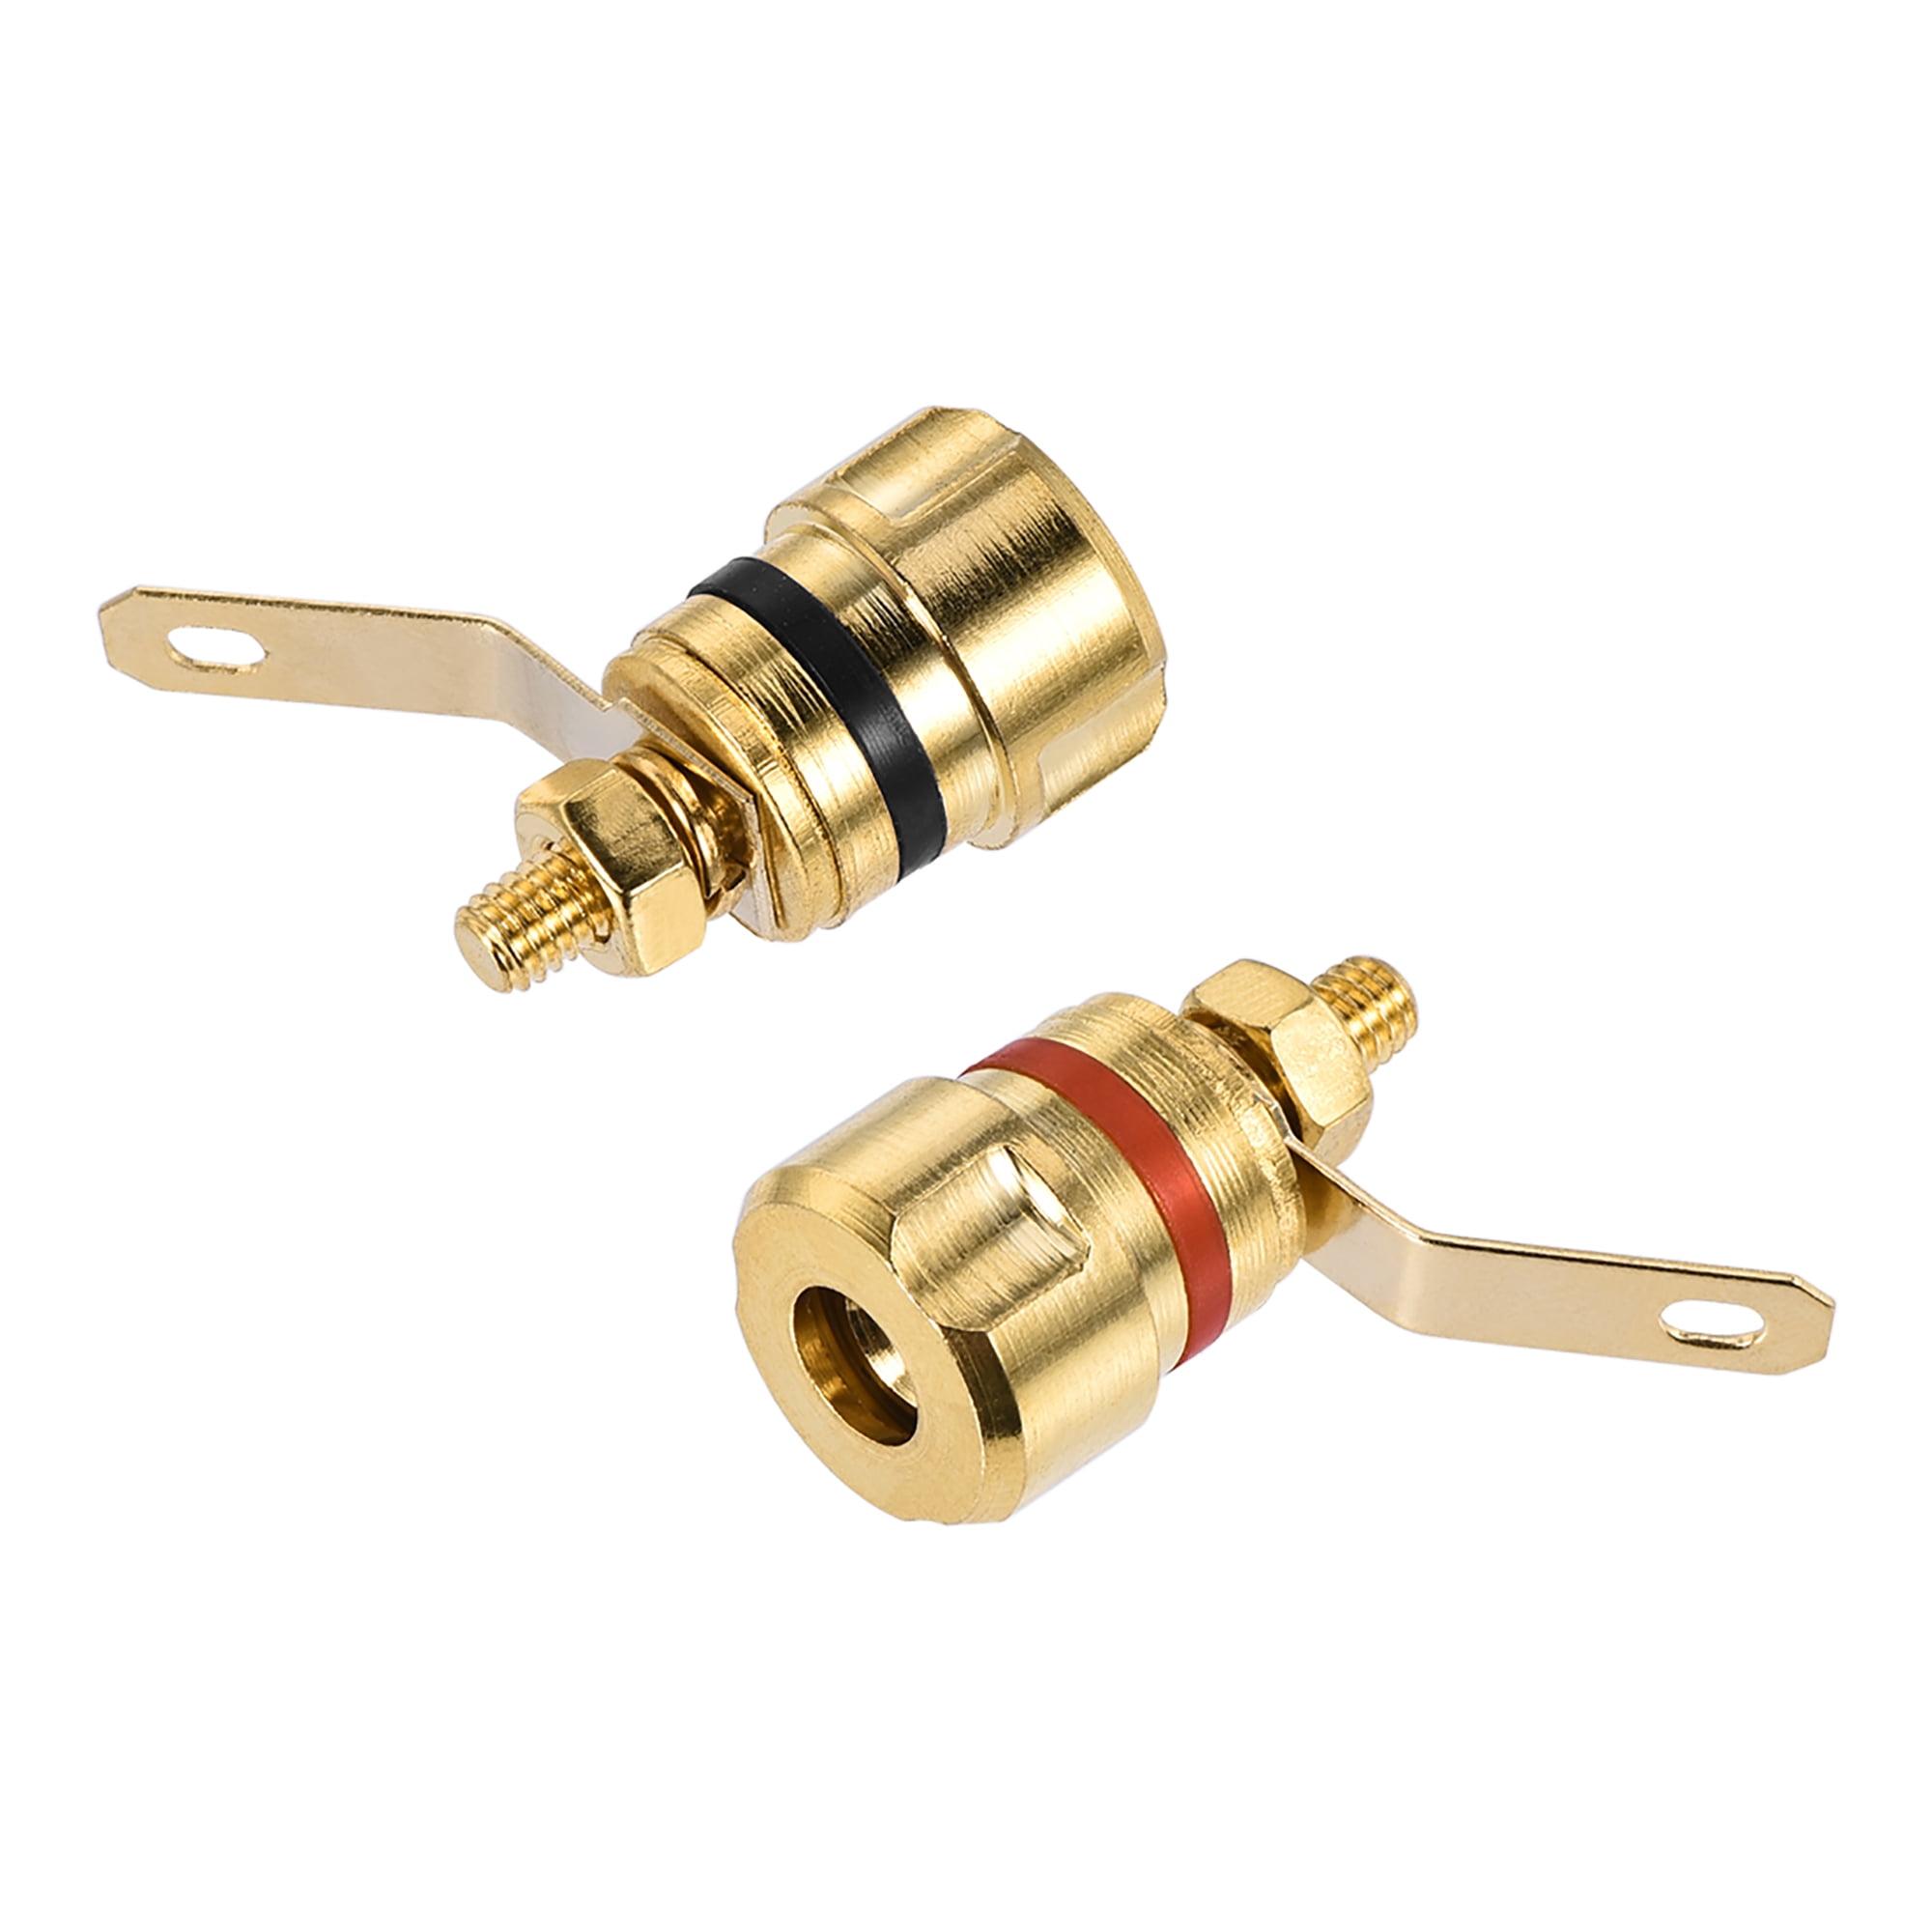 4pcs Gold Plated Audio Speaker 5mm Cable Binding Post Short Thread Terminals